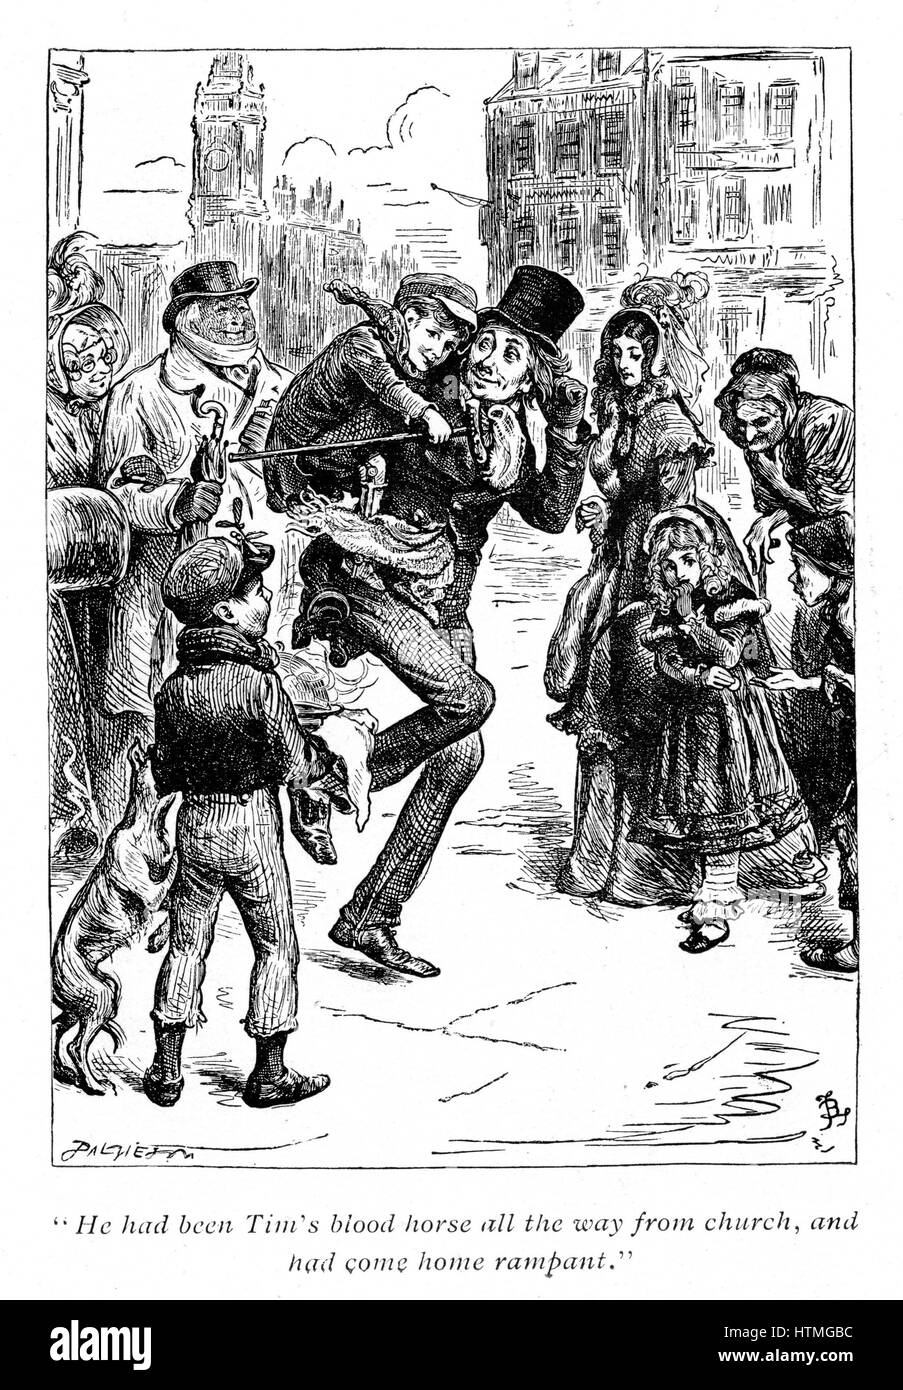 Illustration for 'A Christmas Carol' Charles Dickens (1812-1870). Bob Cratchet carries tiny Tim on his shoulders Stock Photo